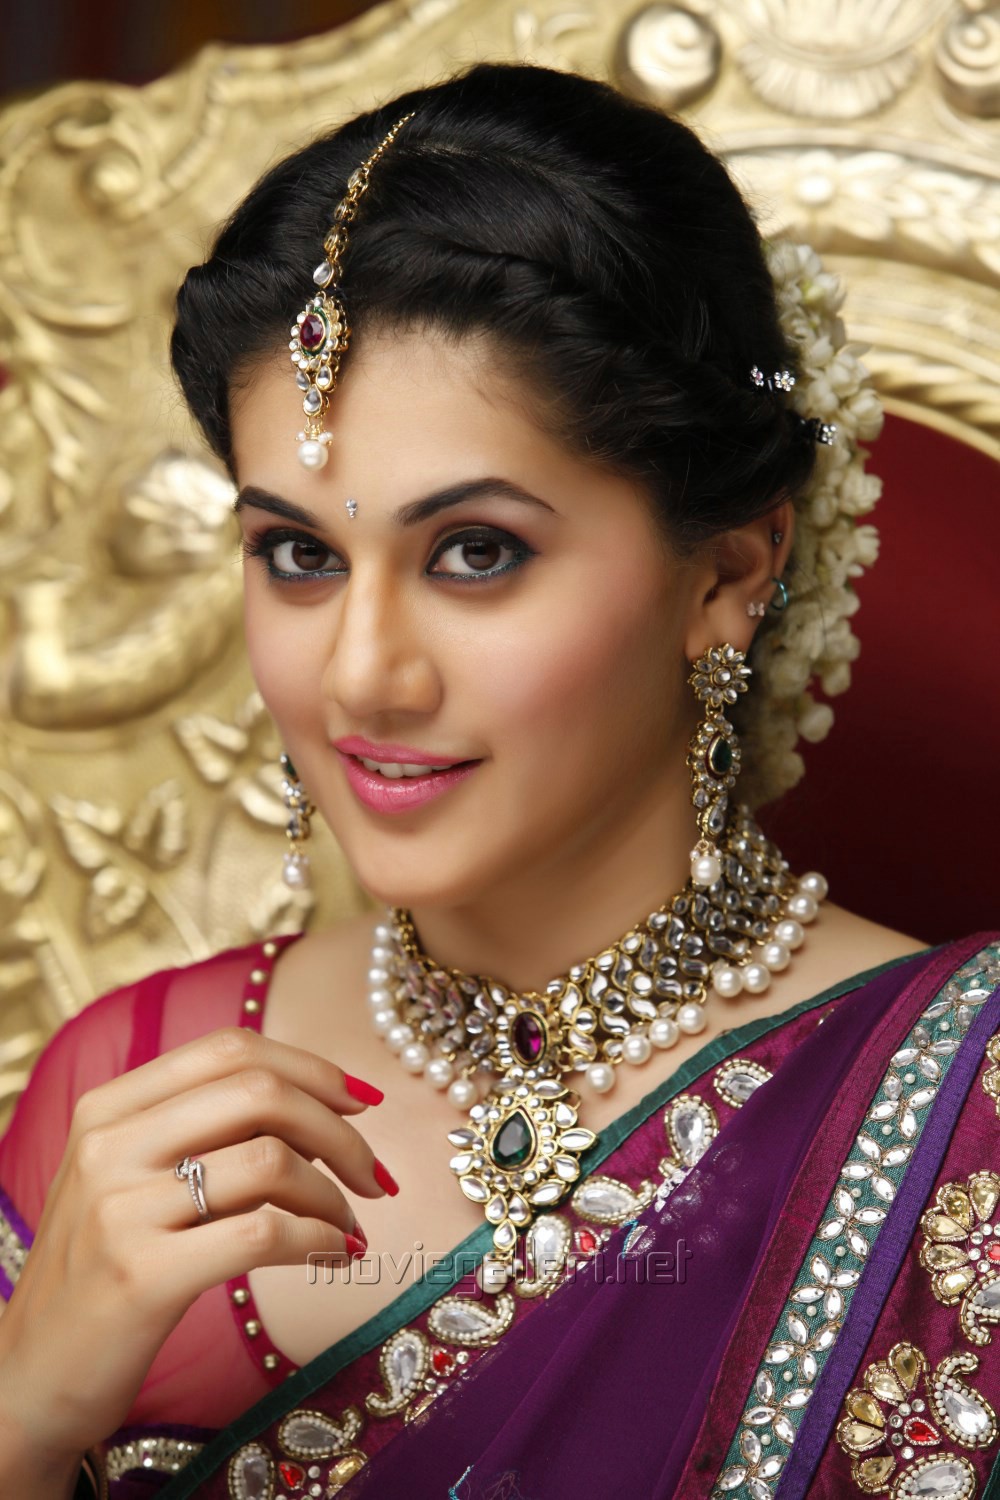 Tapsee Pannu Indian Model And Actress Most Hottest And Sexiest Stills Free Wallpapers